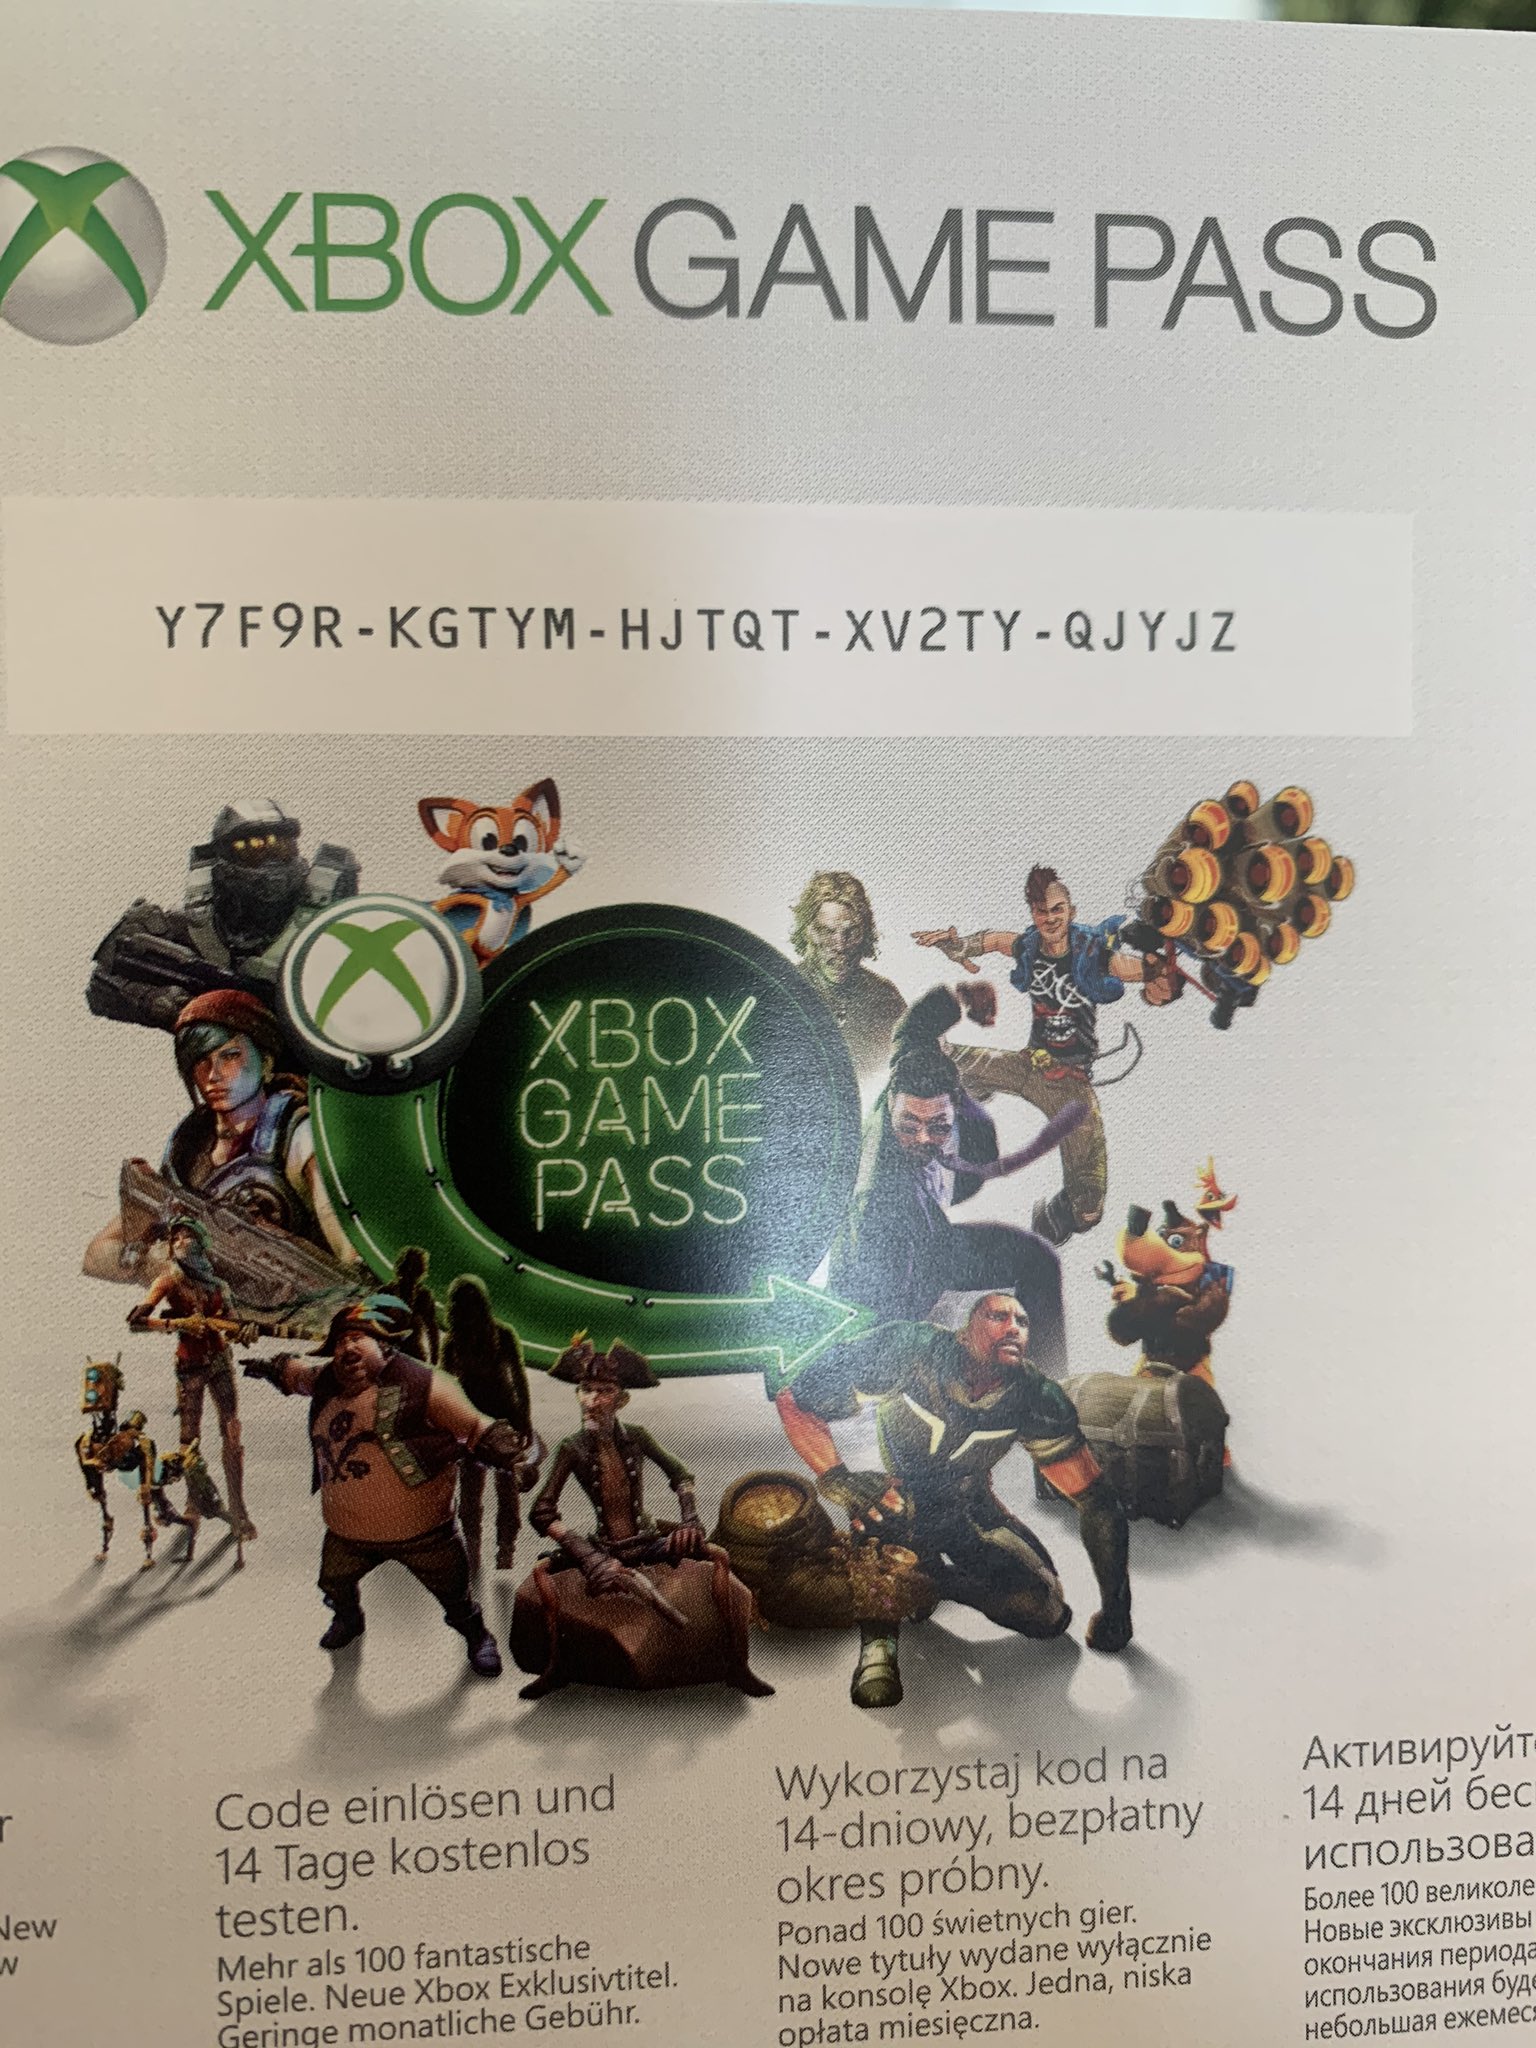 Xbox game pass code for new users. Enjoy and happy new year!!! : r/xbox